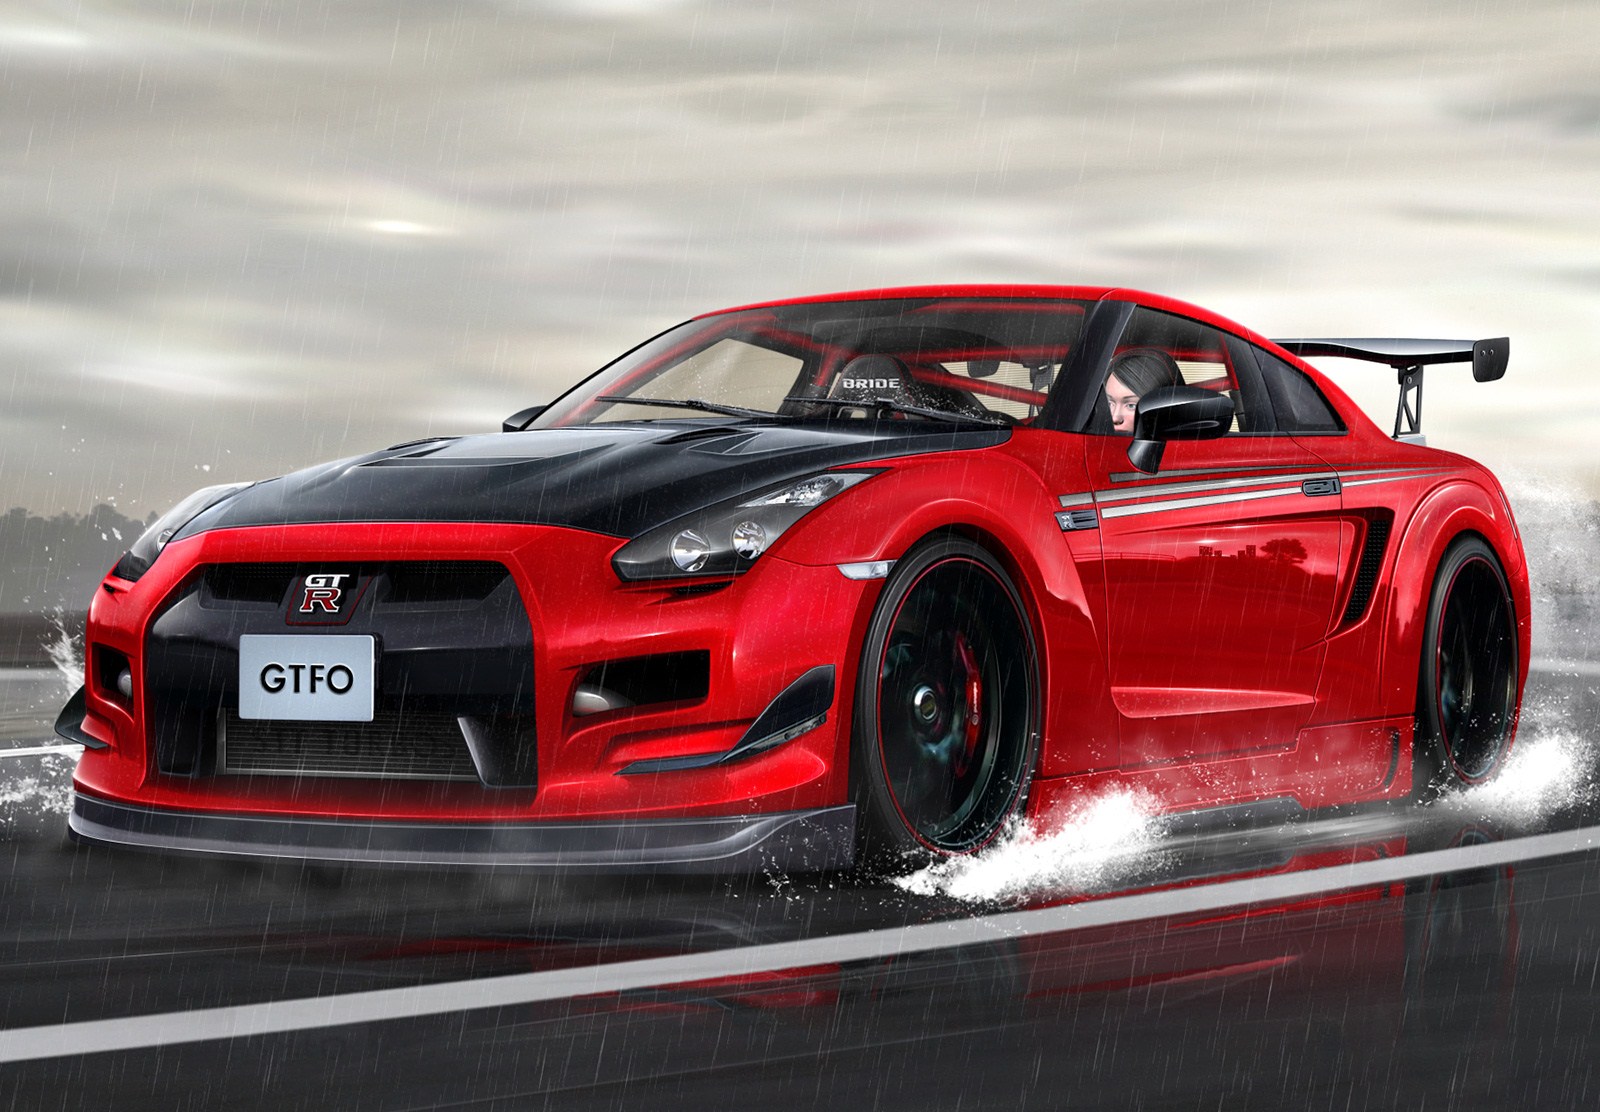 2014 Nissan skyline gtr Car Review  Car Wallpaper Collections Gallery 